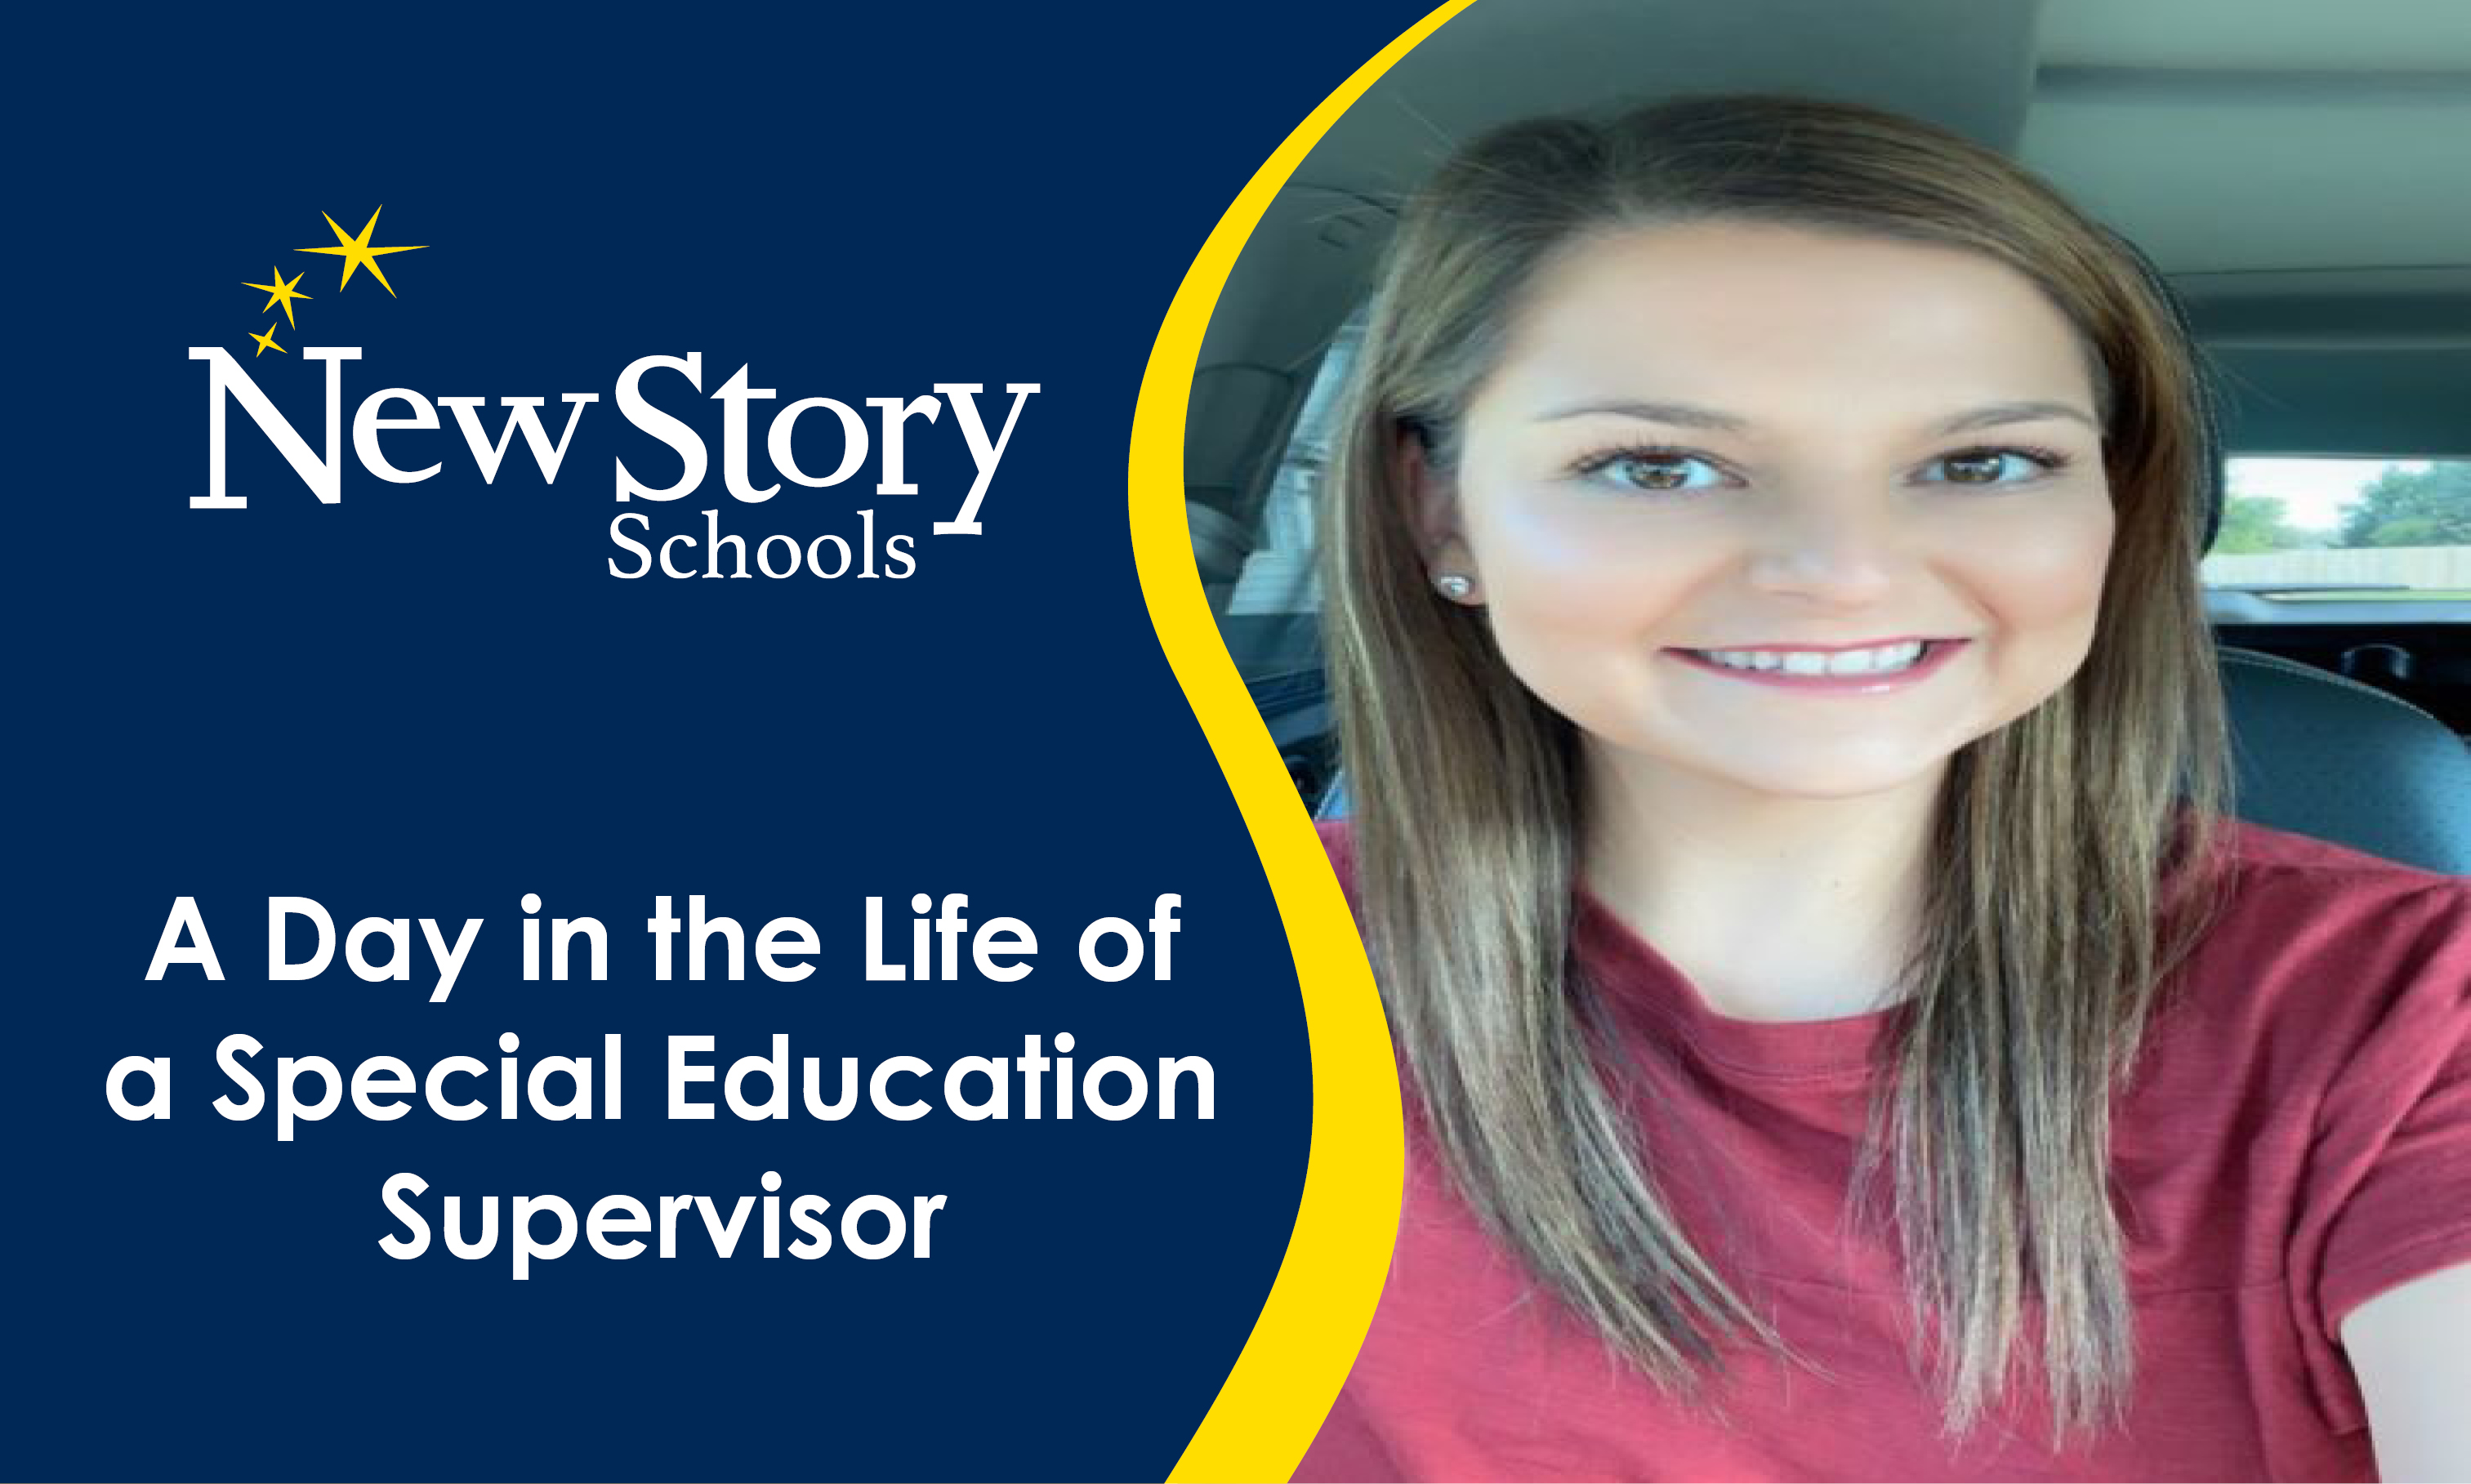 A Day in the Life of a Special Education Supervisor